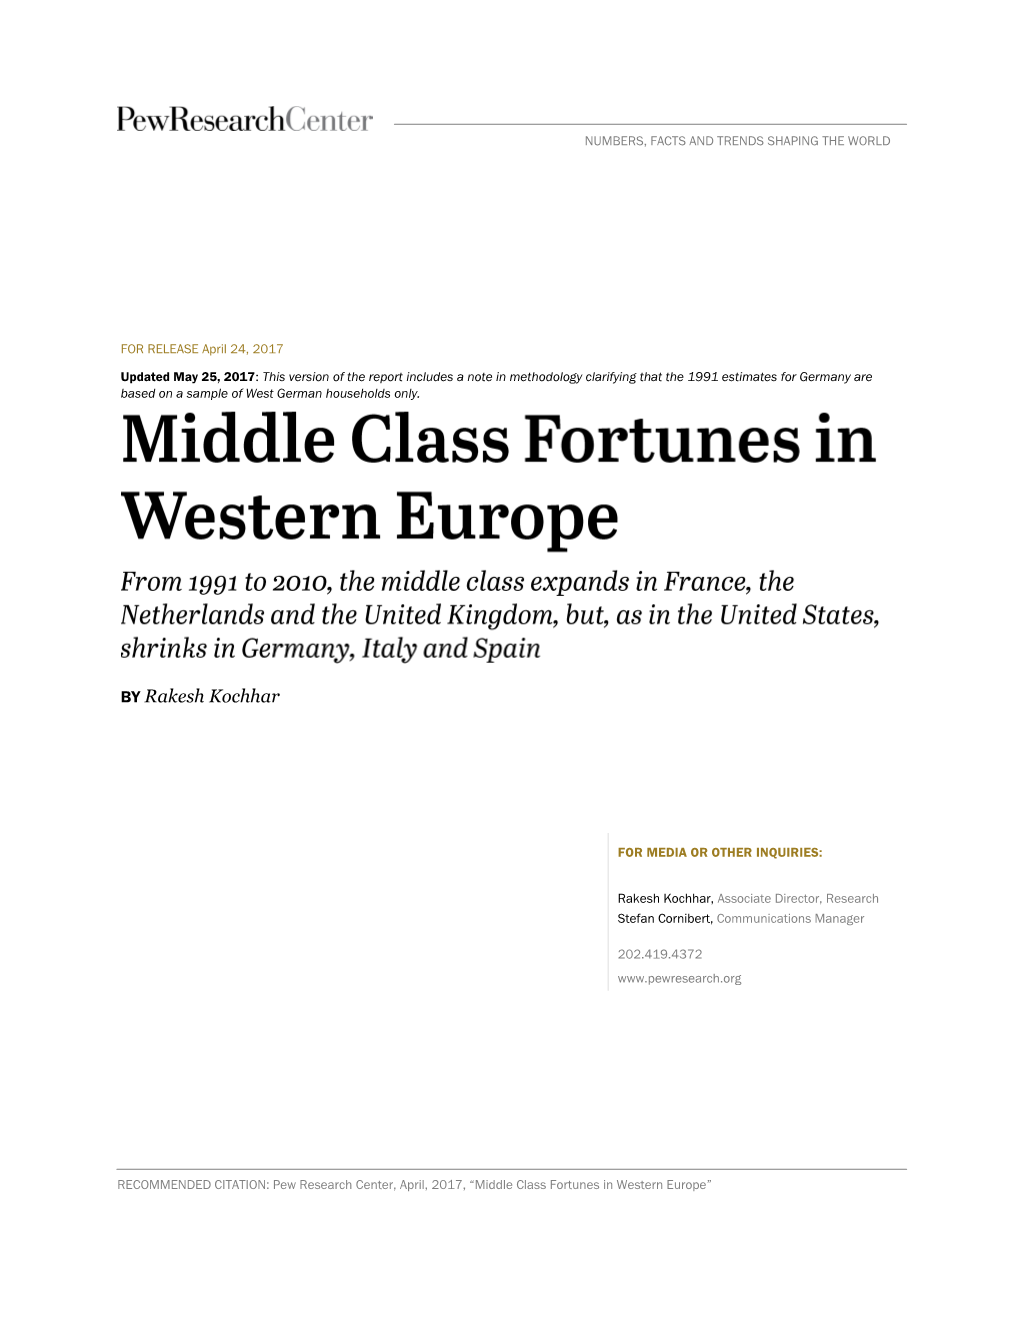 Middle Class Fortunes in Western Europe”